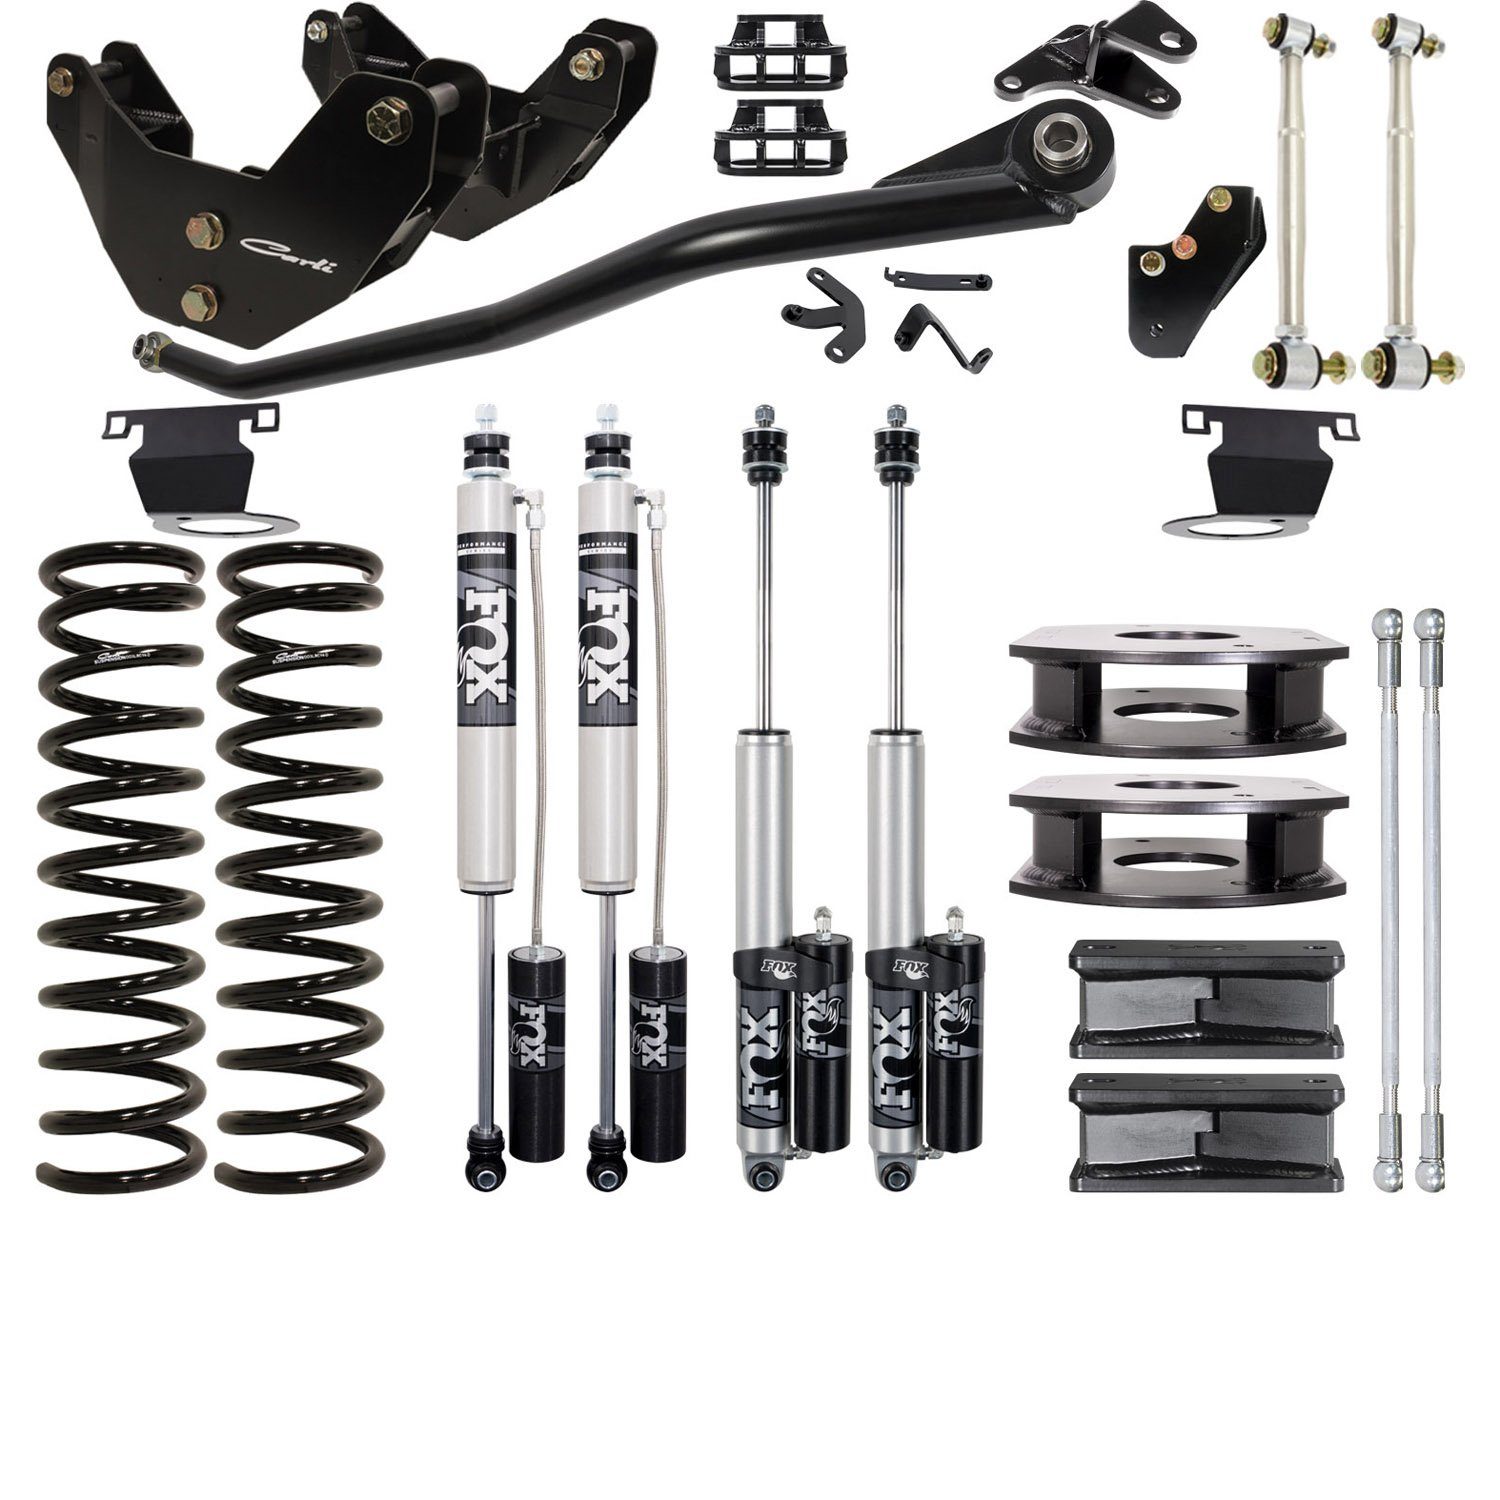 '14-18 Ram 2500 Air Ride Backcountry System-3.25" Lift Suspension Carli Suspension parts